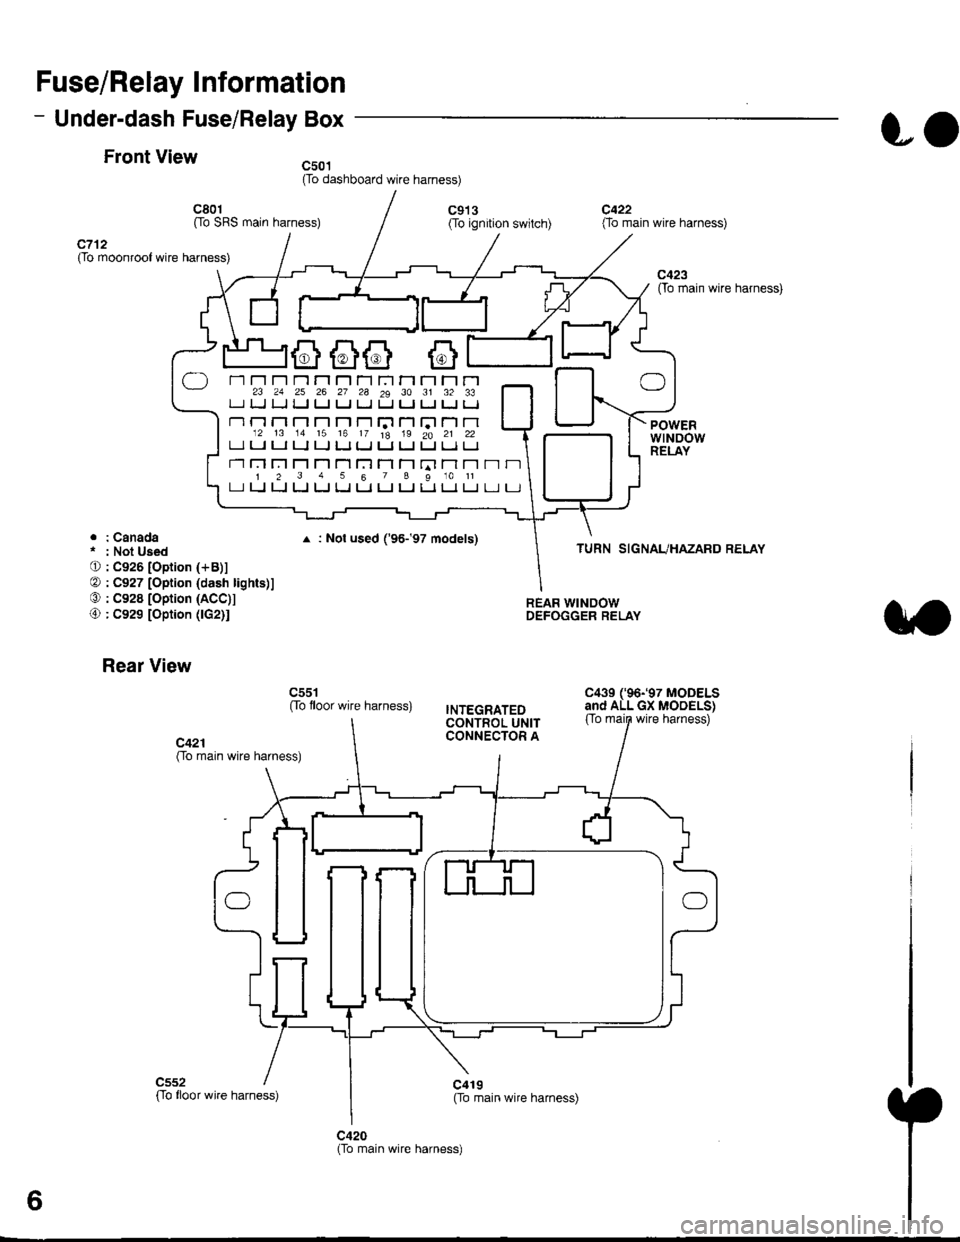 HONDA CIVIC 1999 6.G Workshop Manual Fuse/Relay Information
- Under-dash Fuse/Relay Box
Front View
c712(To moonroof wire harness)
. : Canadai : Not UsedO : C926 loprion (+B)l
@ : C927 loption (dash lights)]
O : C928 [Option (ACC]I
@ : C9